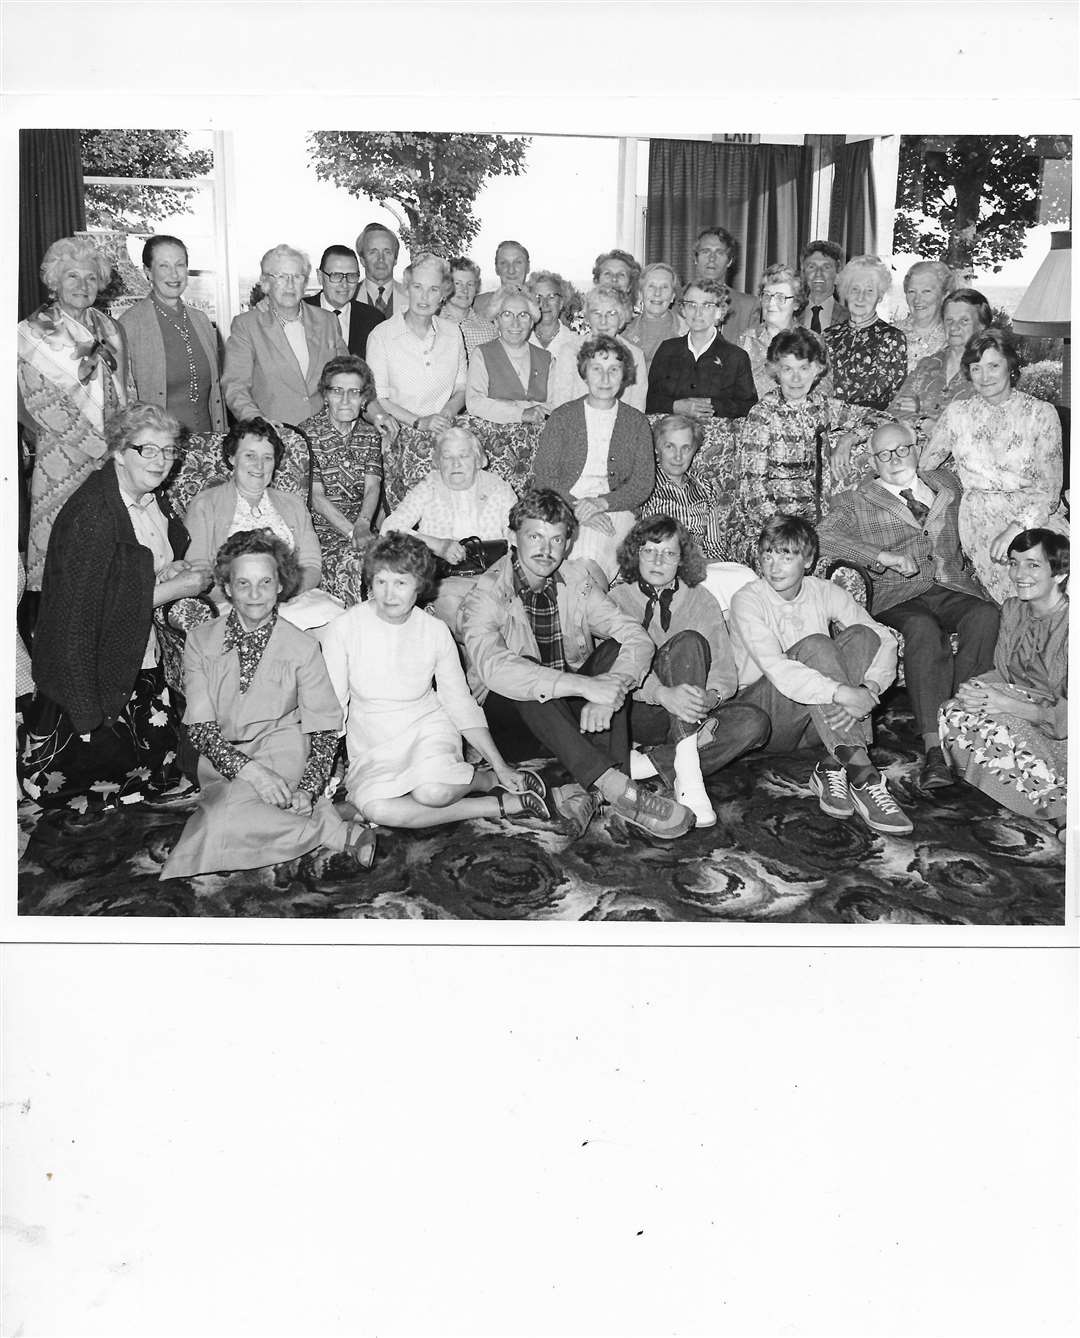 There aren't many clues to pick up on in this archive image so we are at a complete loss as to the occasion. Was the gathering in honour of the older people seated?